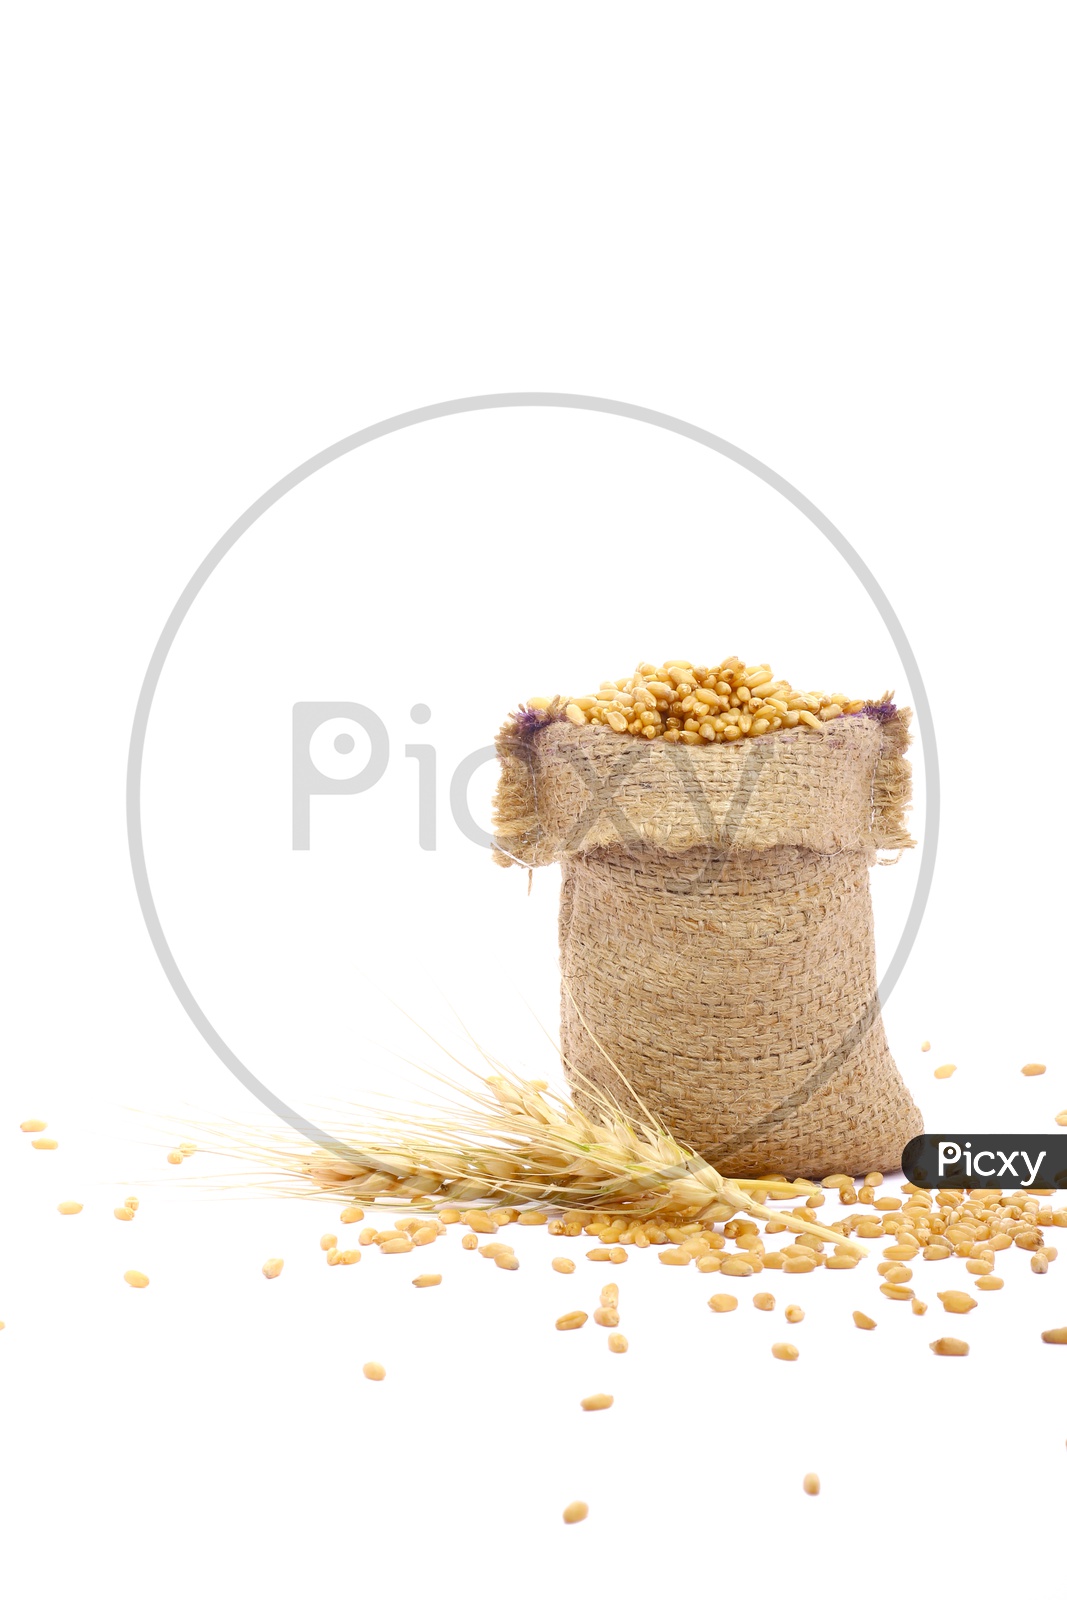 Raw Triticum in Sackbag with a white Background / Wheat Grains in Sackbags